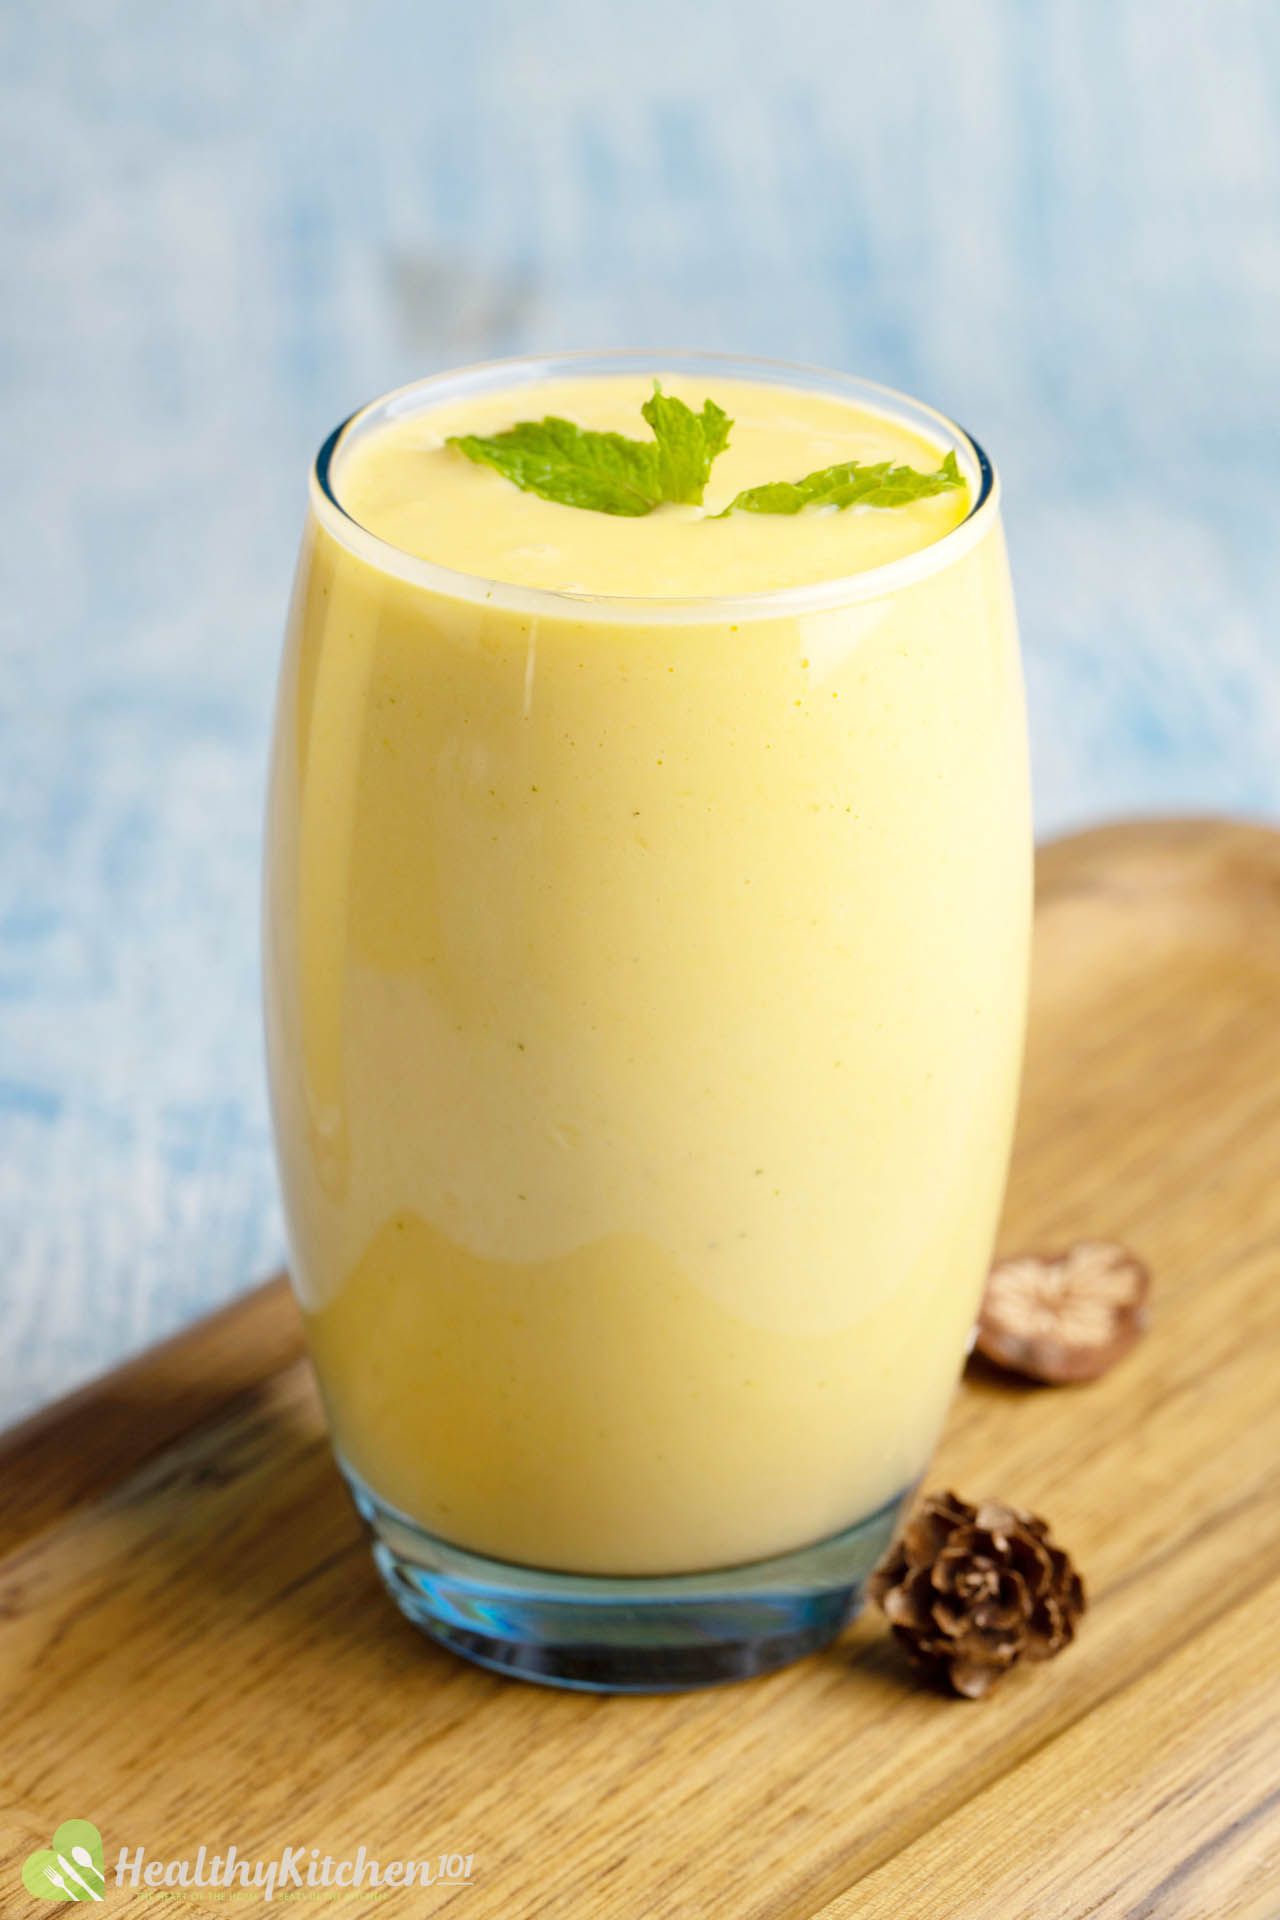 Are Peach Smoothies Healthy?